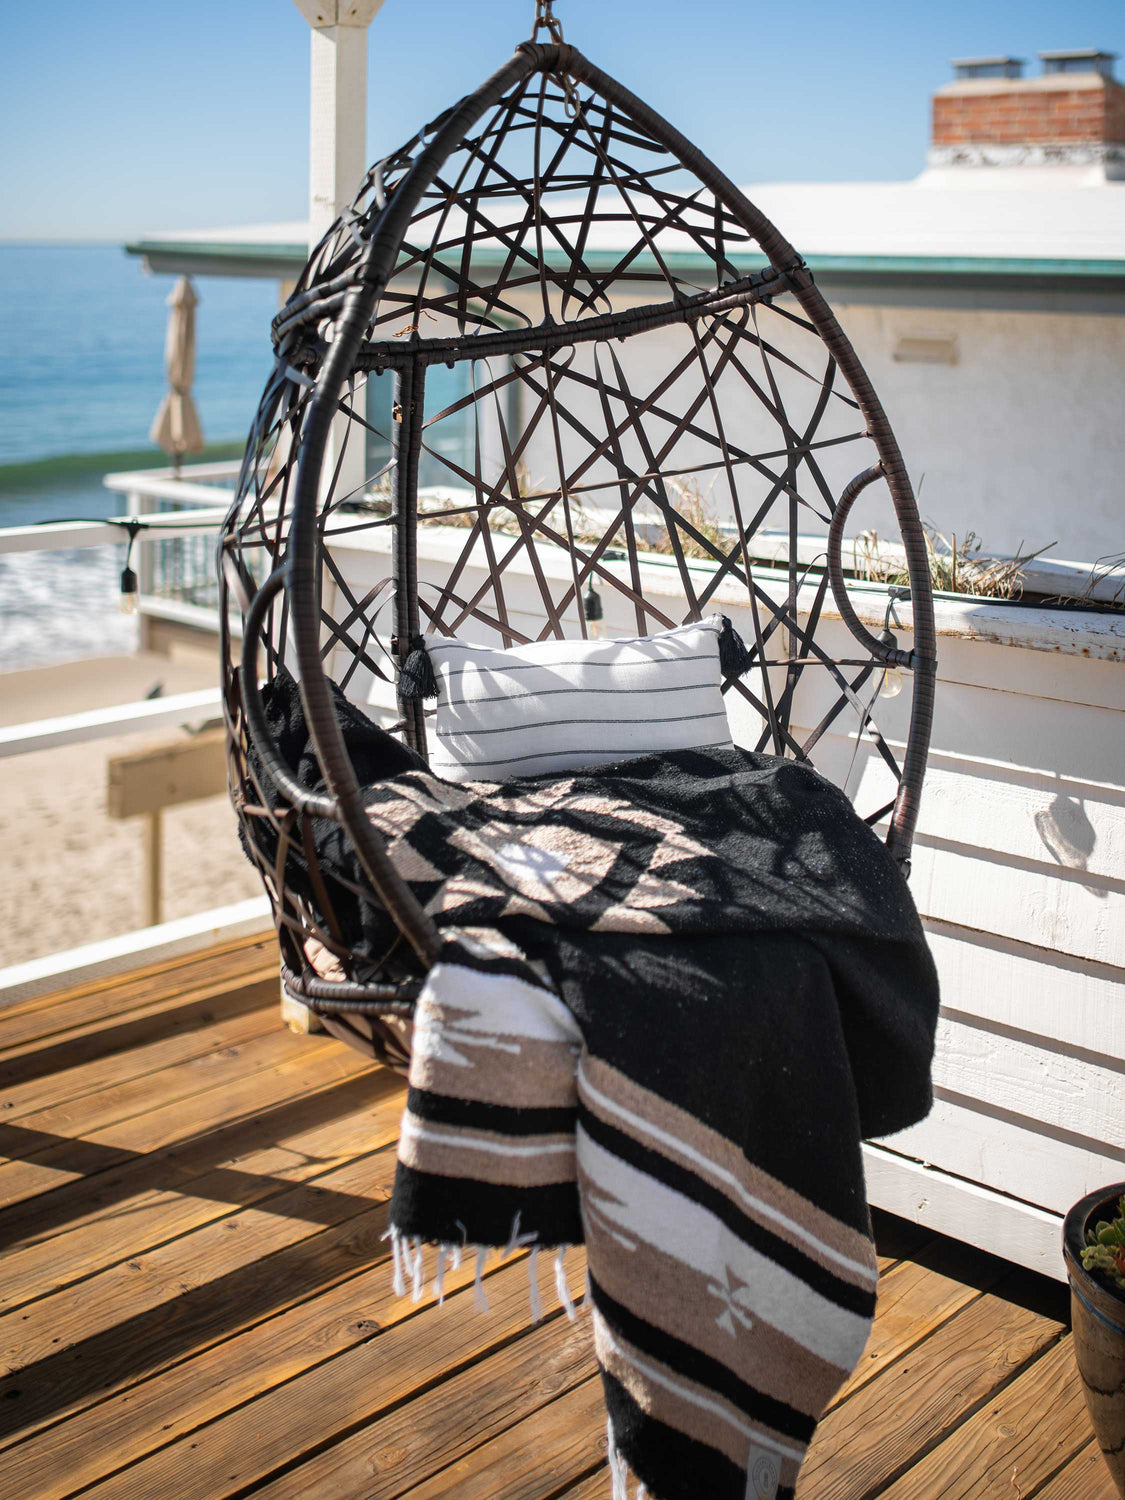 A black and Mexican blanket draped over a hanging char on a balcony overlooking the ocean.